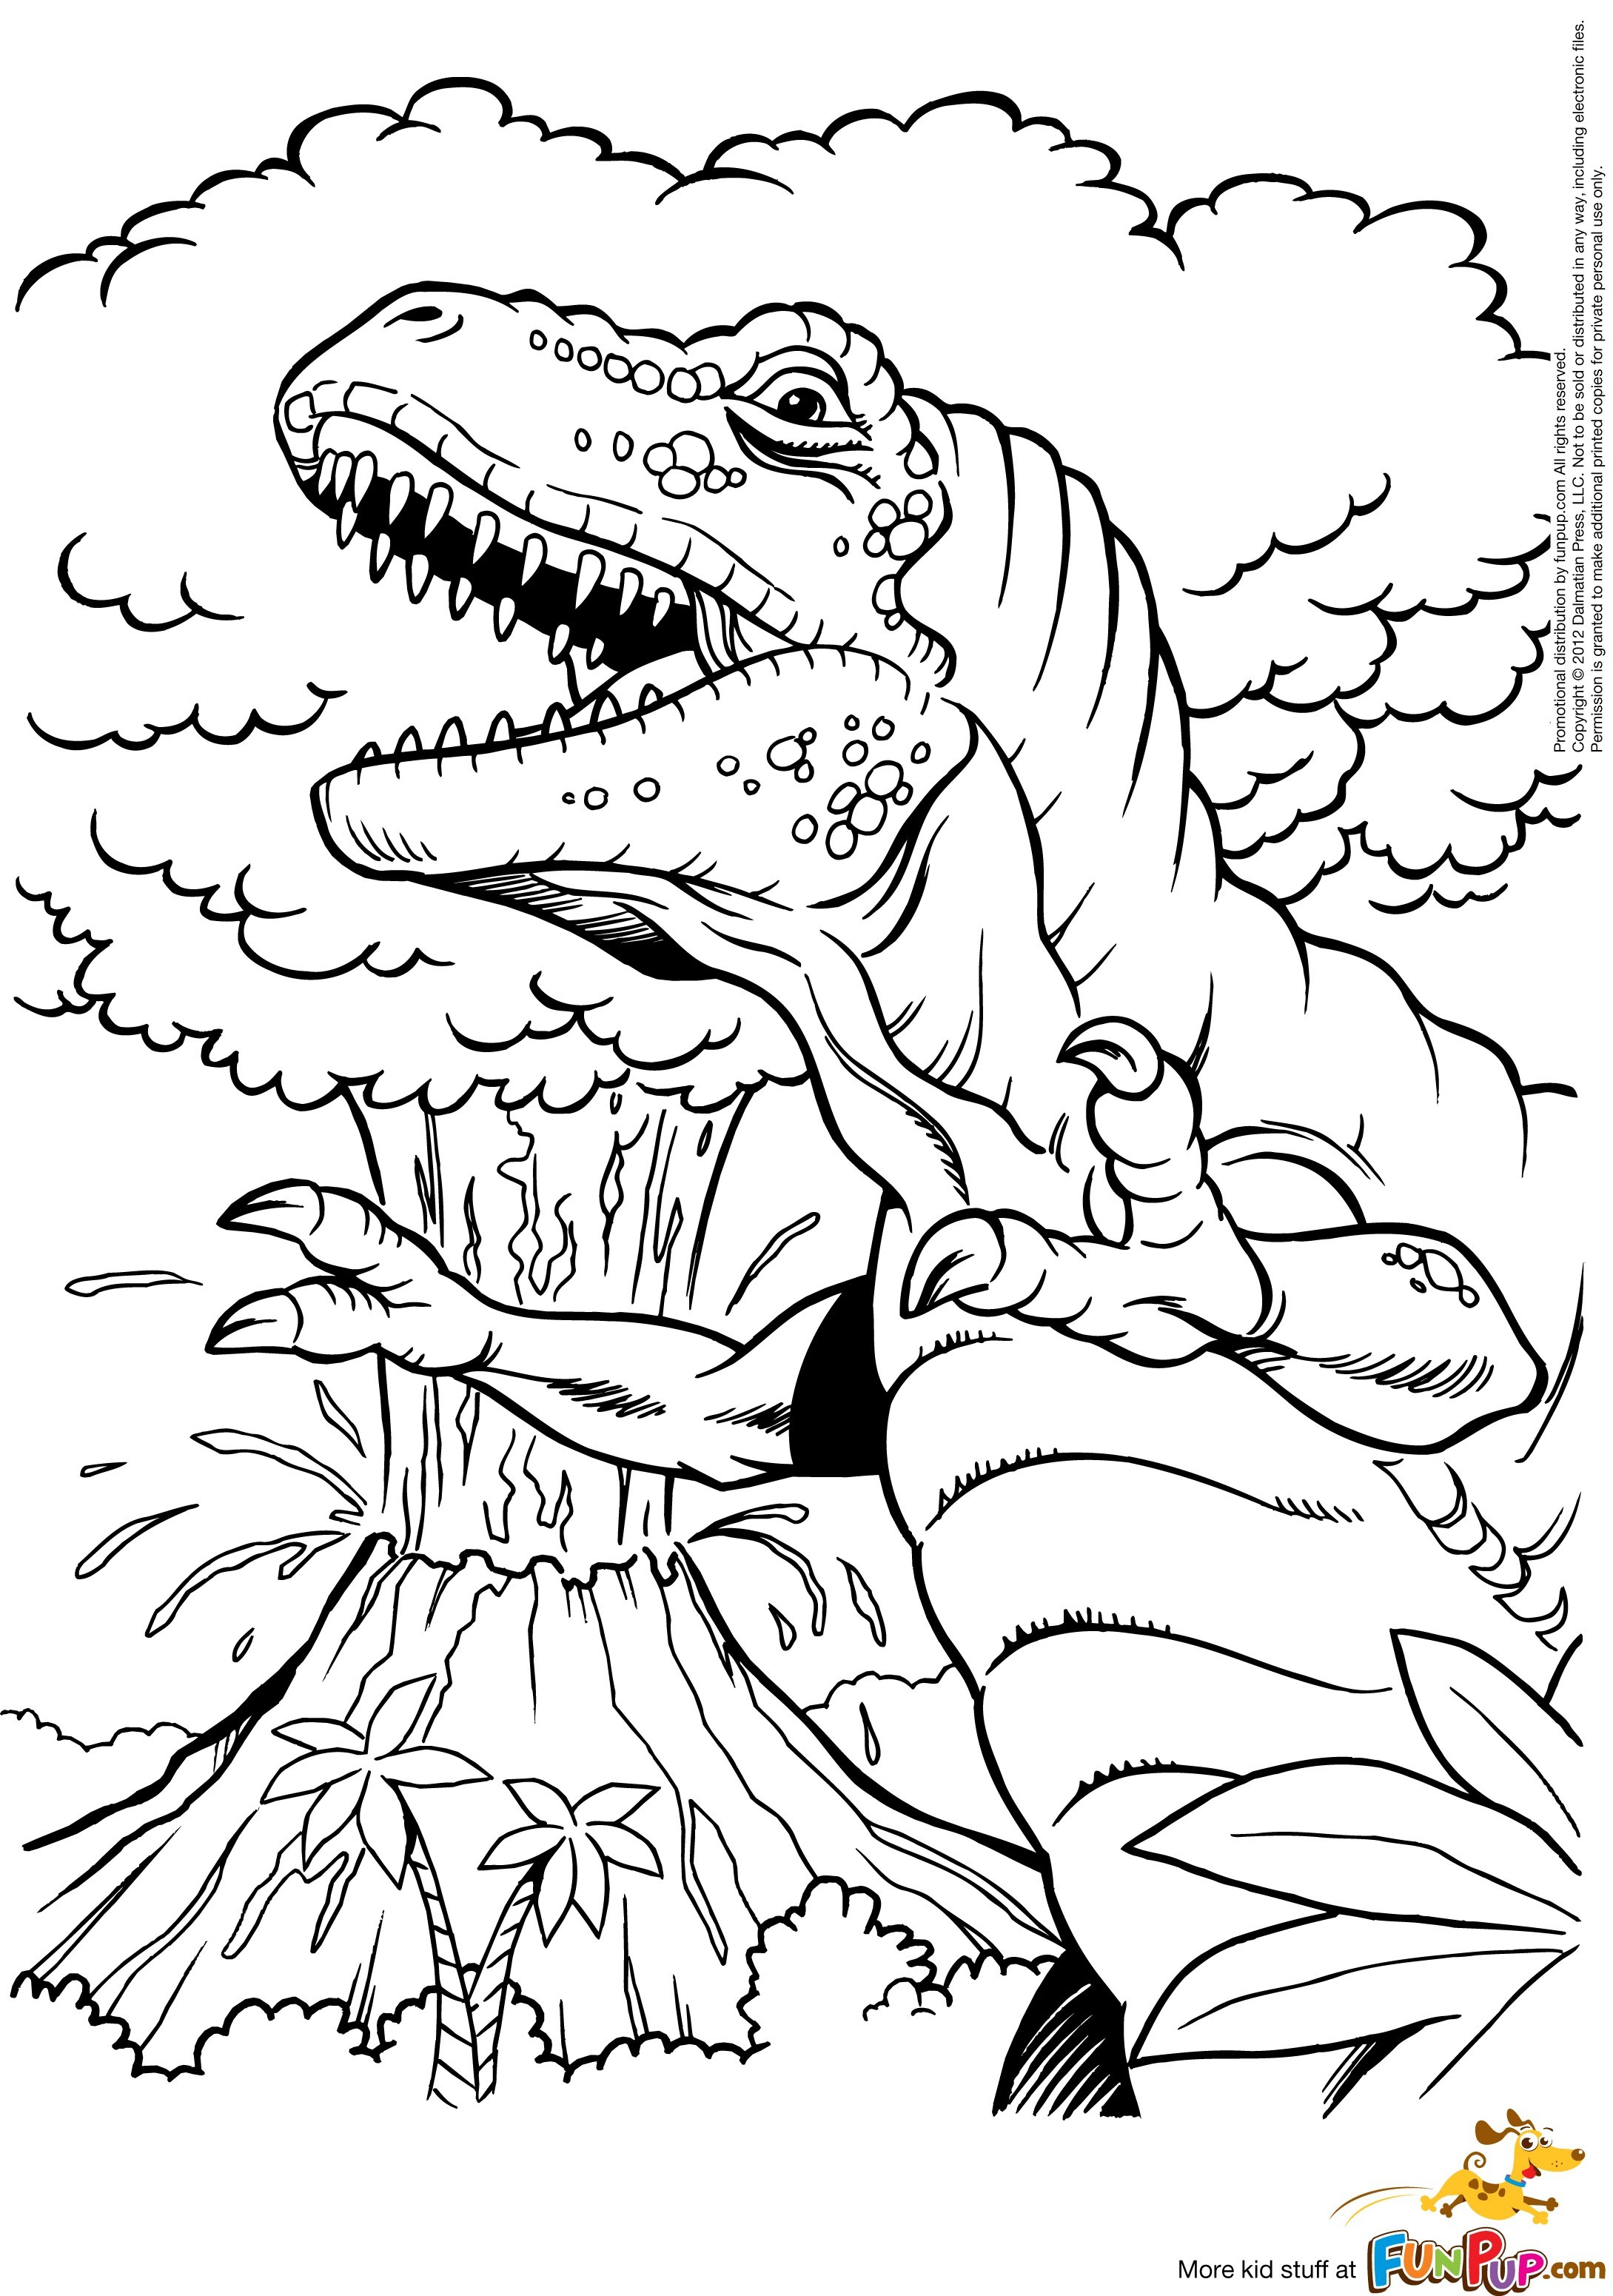 Minecraft Dinosaurs Coloring Pages Inspirational Volcano Coloring Pages Coloring Pages Minecraft Dinosaurs Coloring Pages Luxury